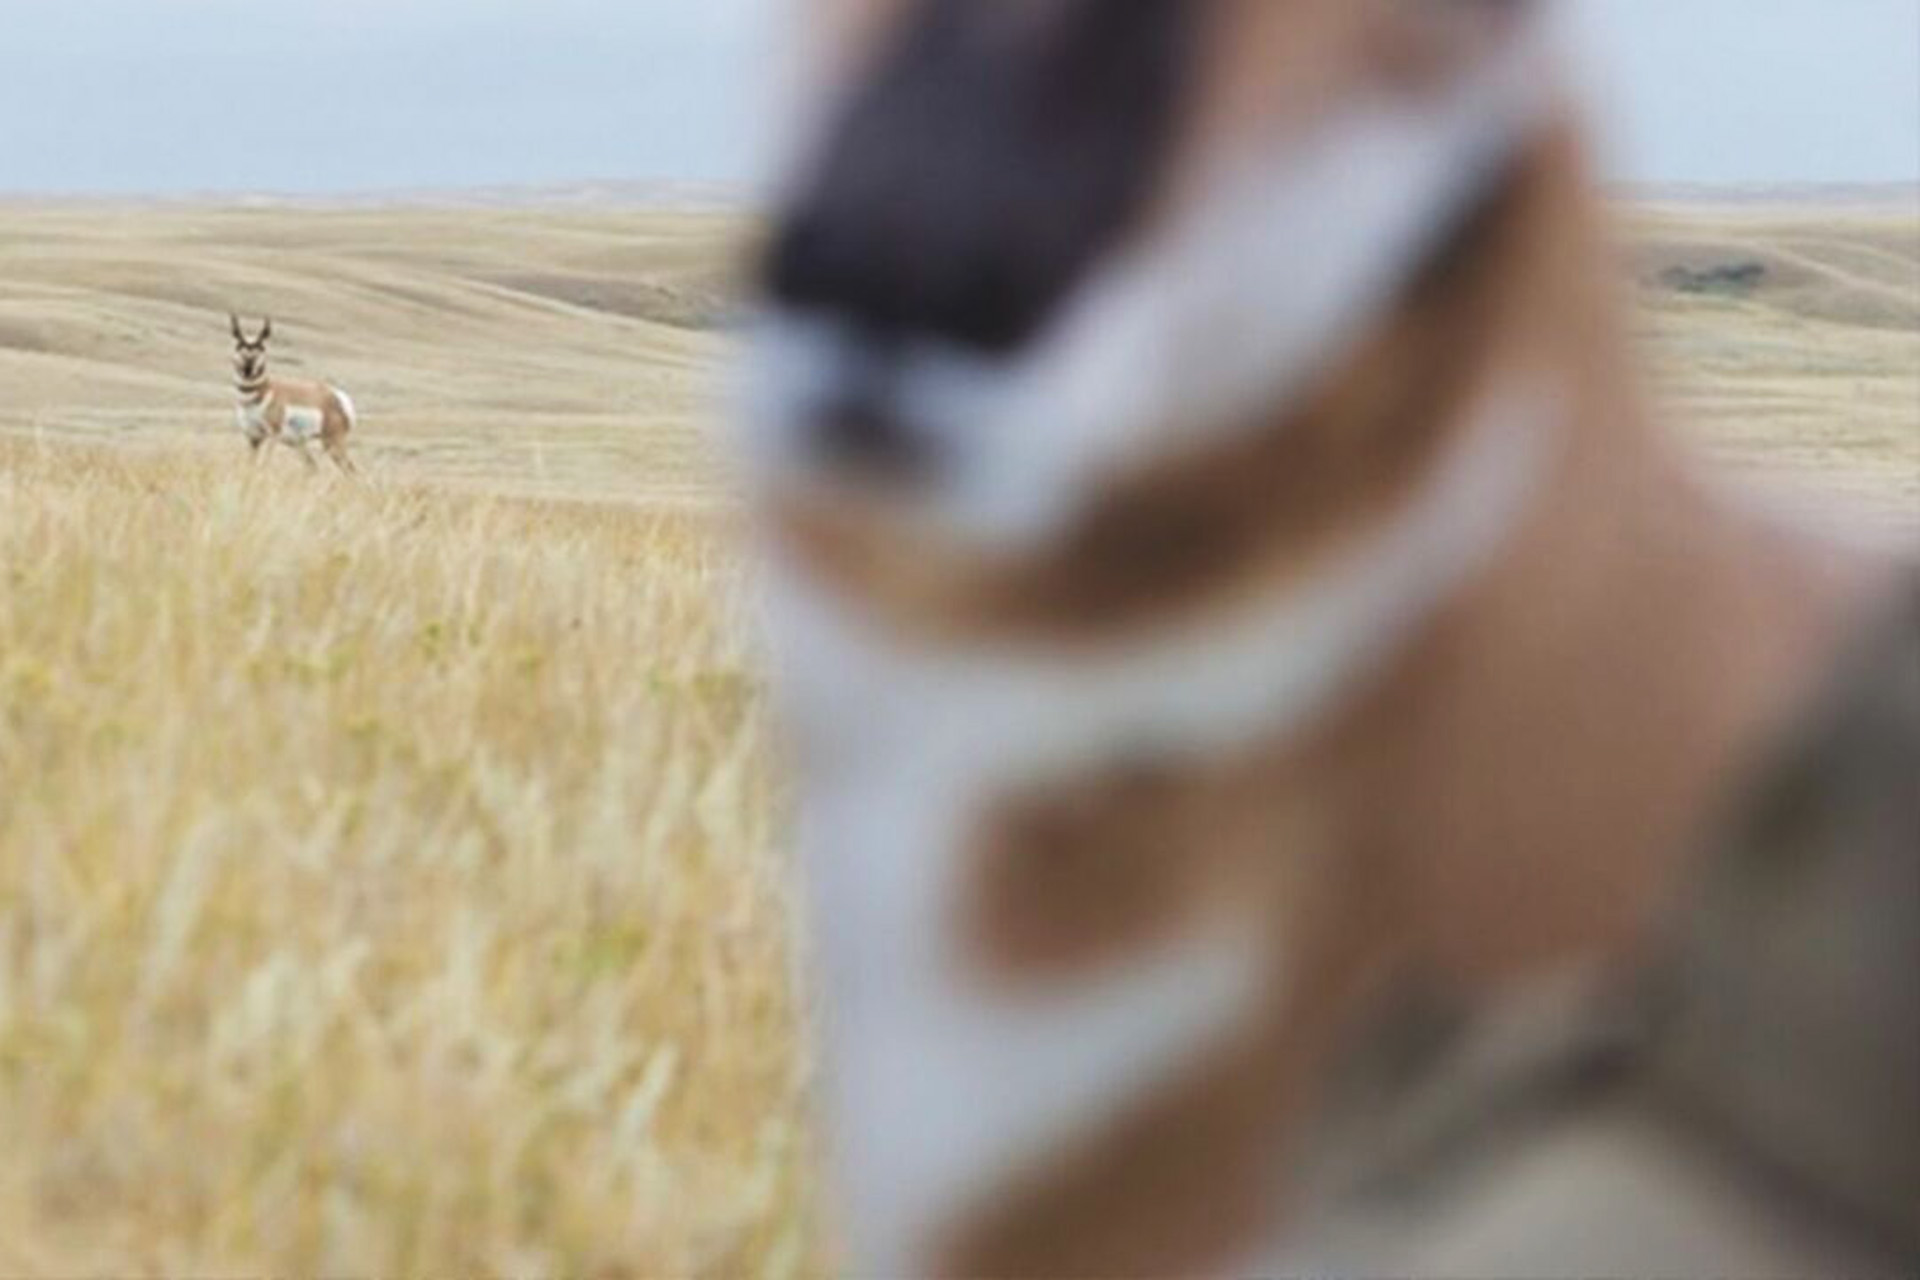 Bowhunting pronghorn with a decoy is an absolute rush, especially if you catch them during the peak rut.